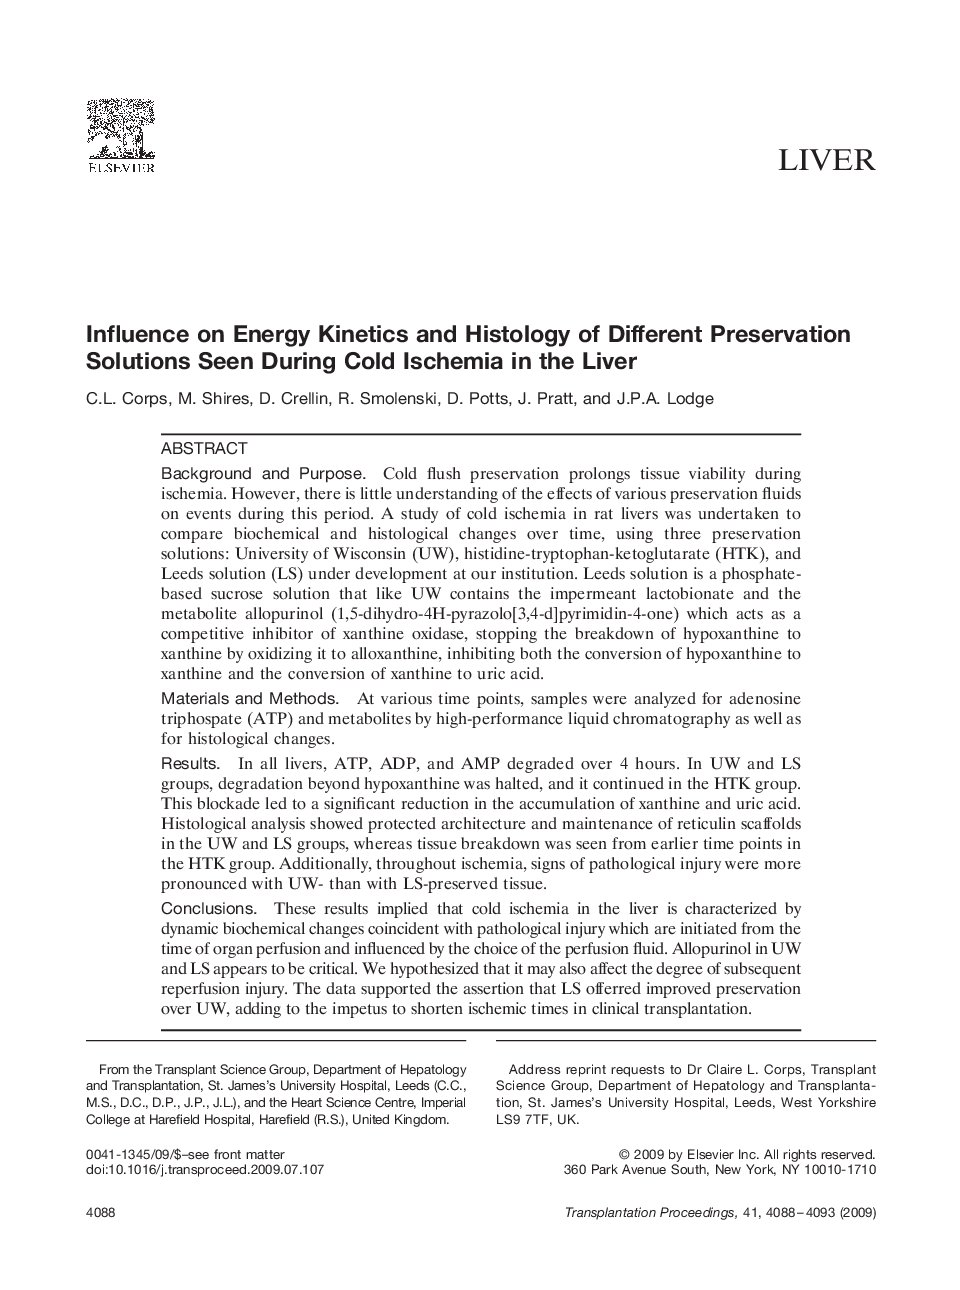 Influence on Energy Kinetics and Histology of Different Preservation Solutions Seen During Cold Ischemia in the Liver